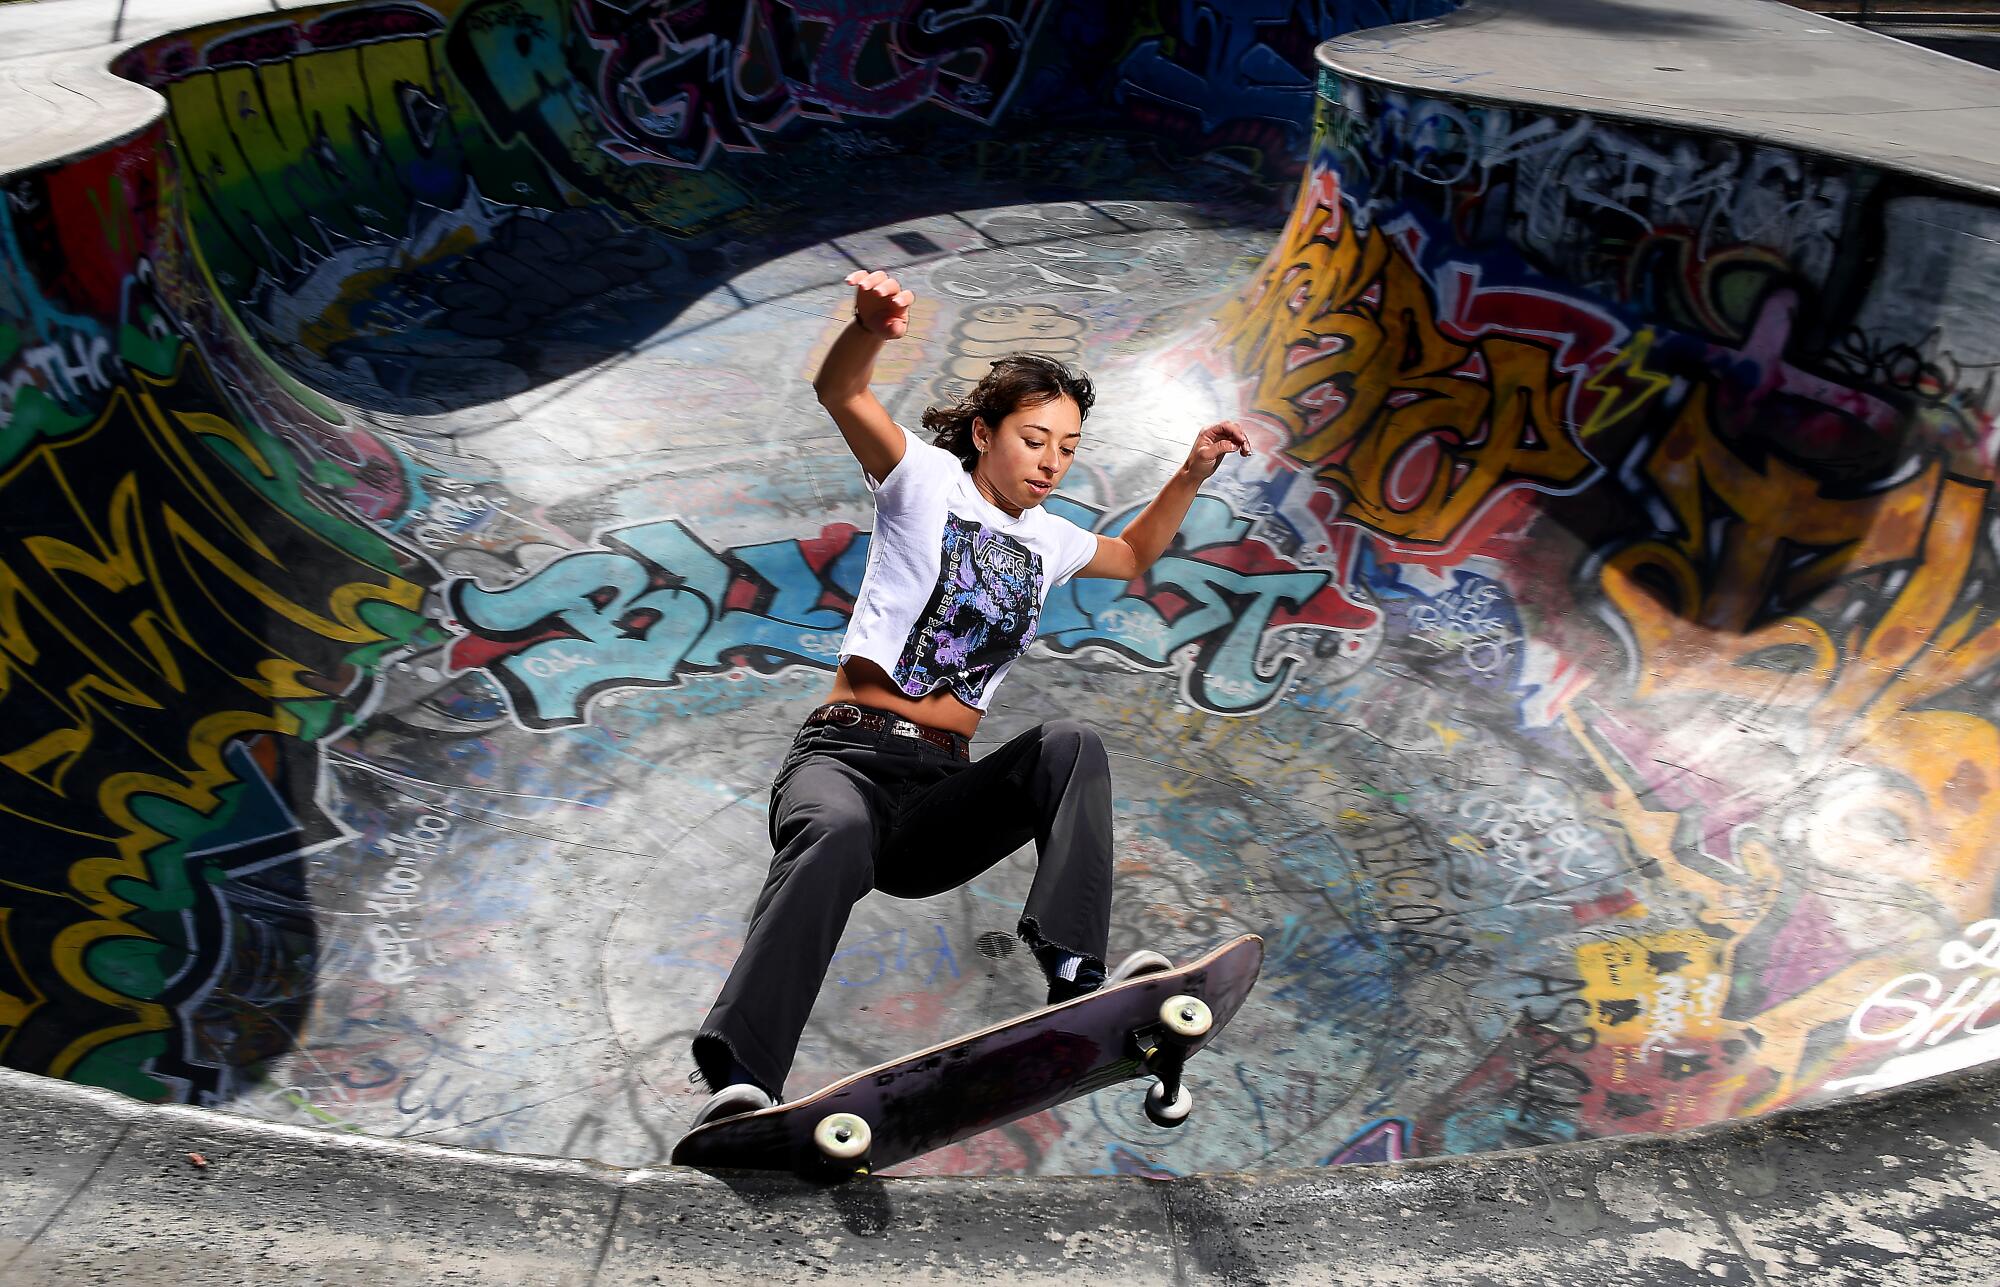 Lizzie Armanto is photographed at Garvanza Skate Park in Los Angeles.